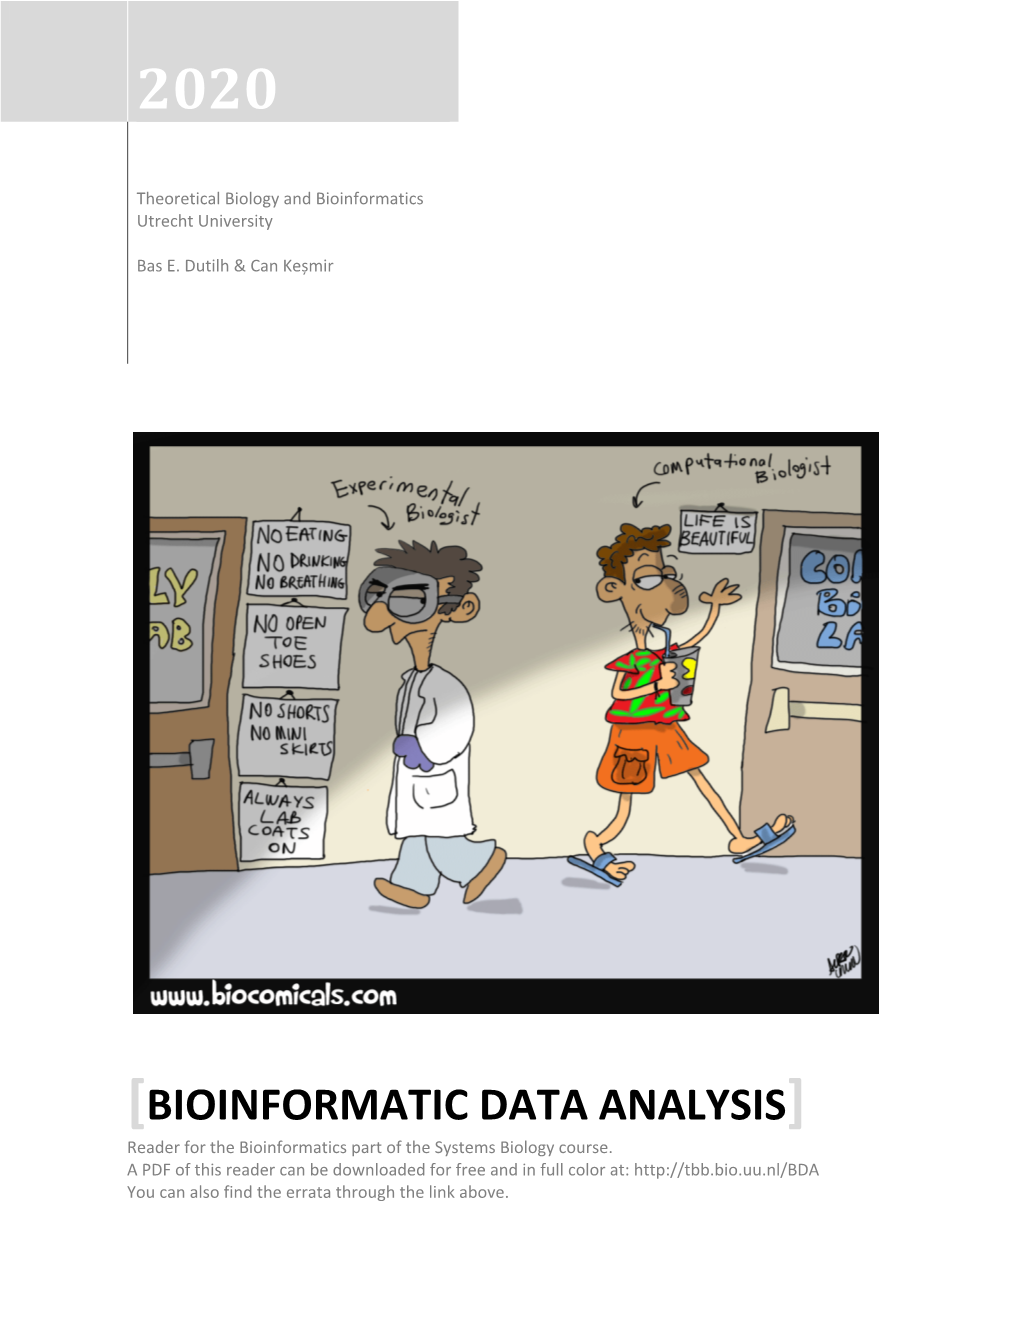 [BIOINFORMATIC DATA ANALYSIS] Reader for the Bioinformatics Part of the Systems Biology Course